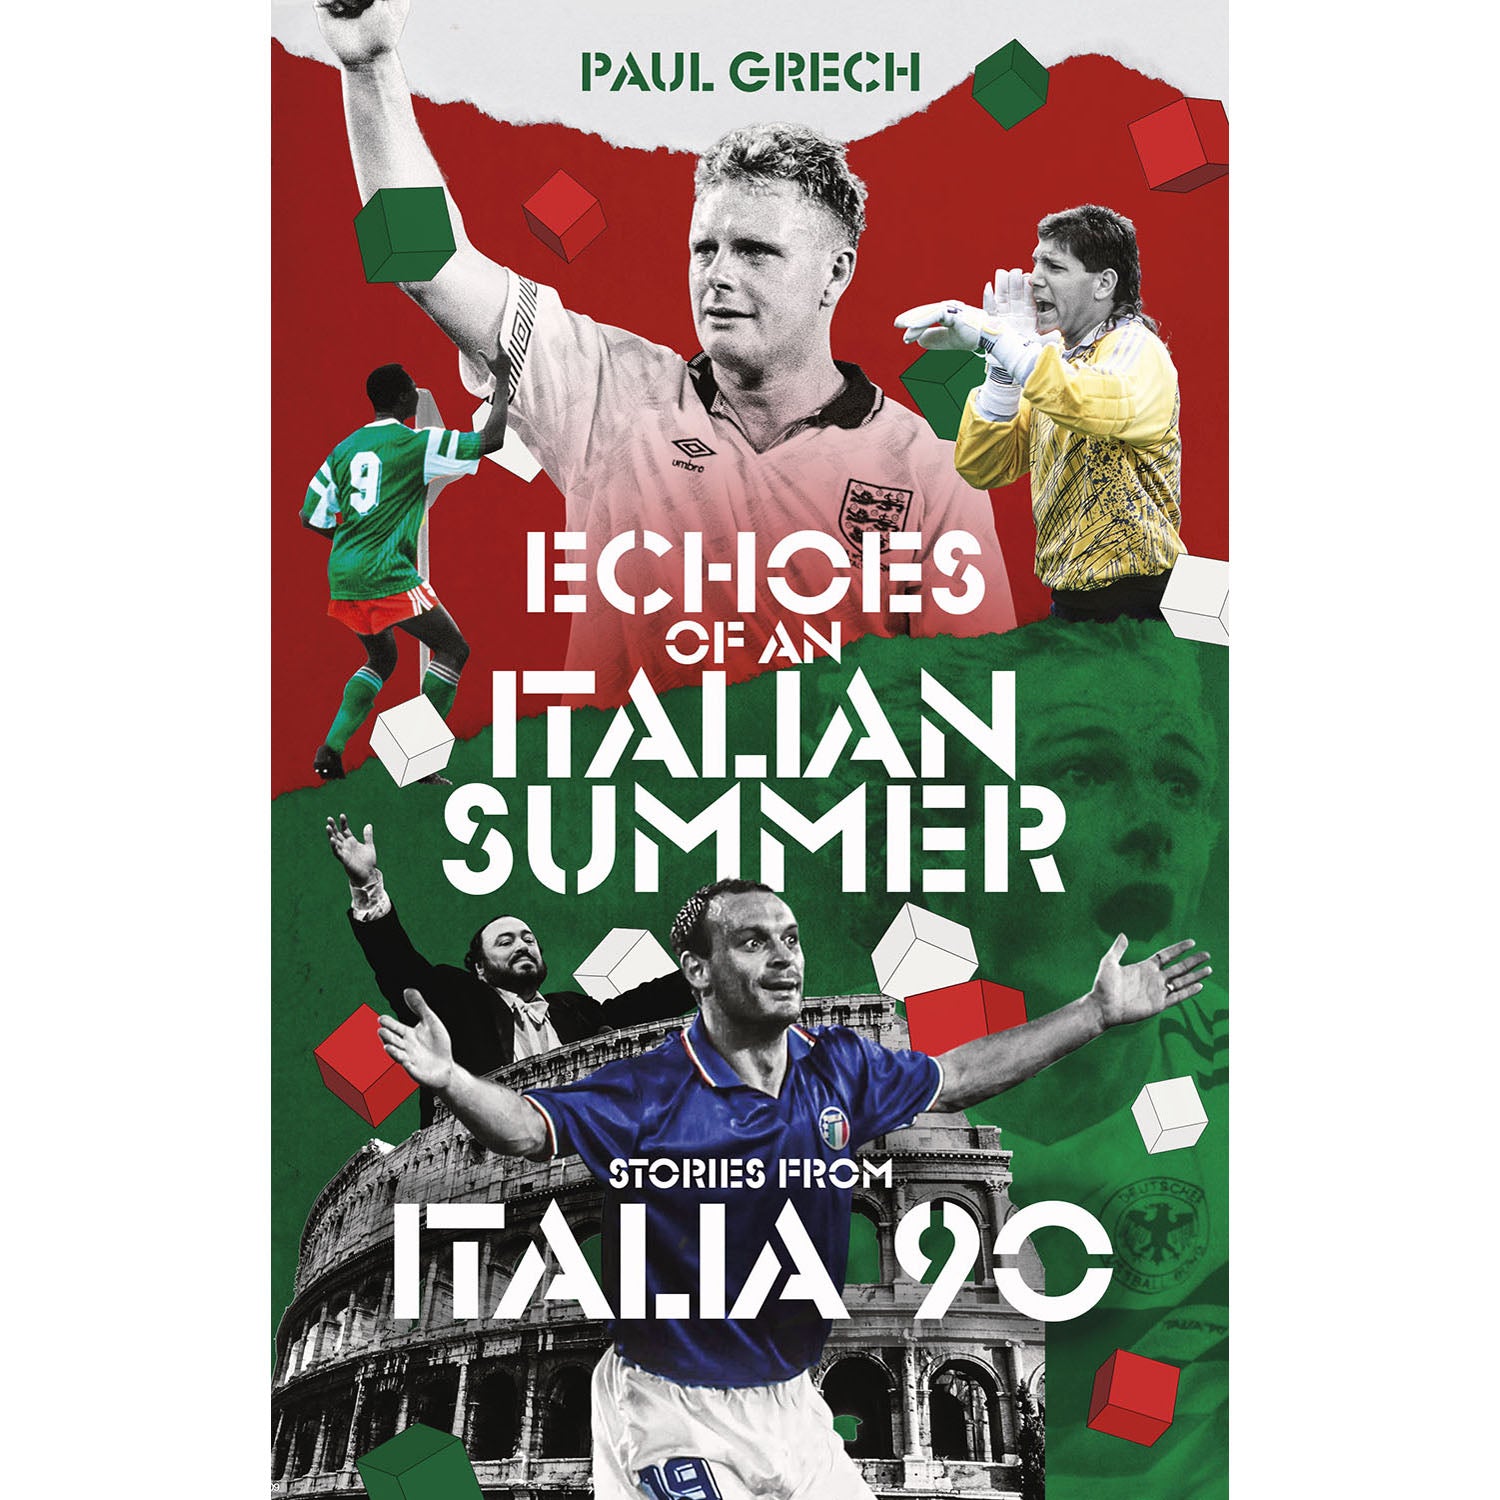 Echoes of an Italian Summer – Stories from Italia 90